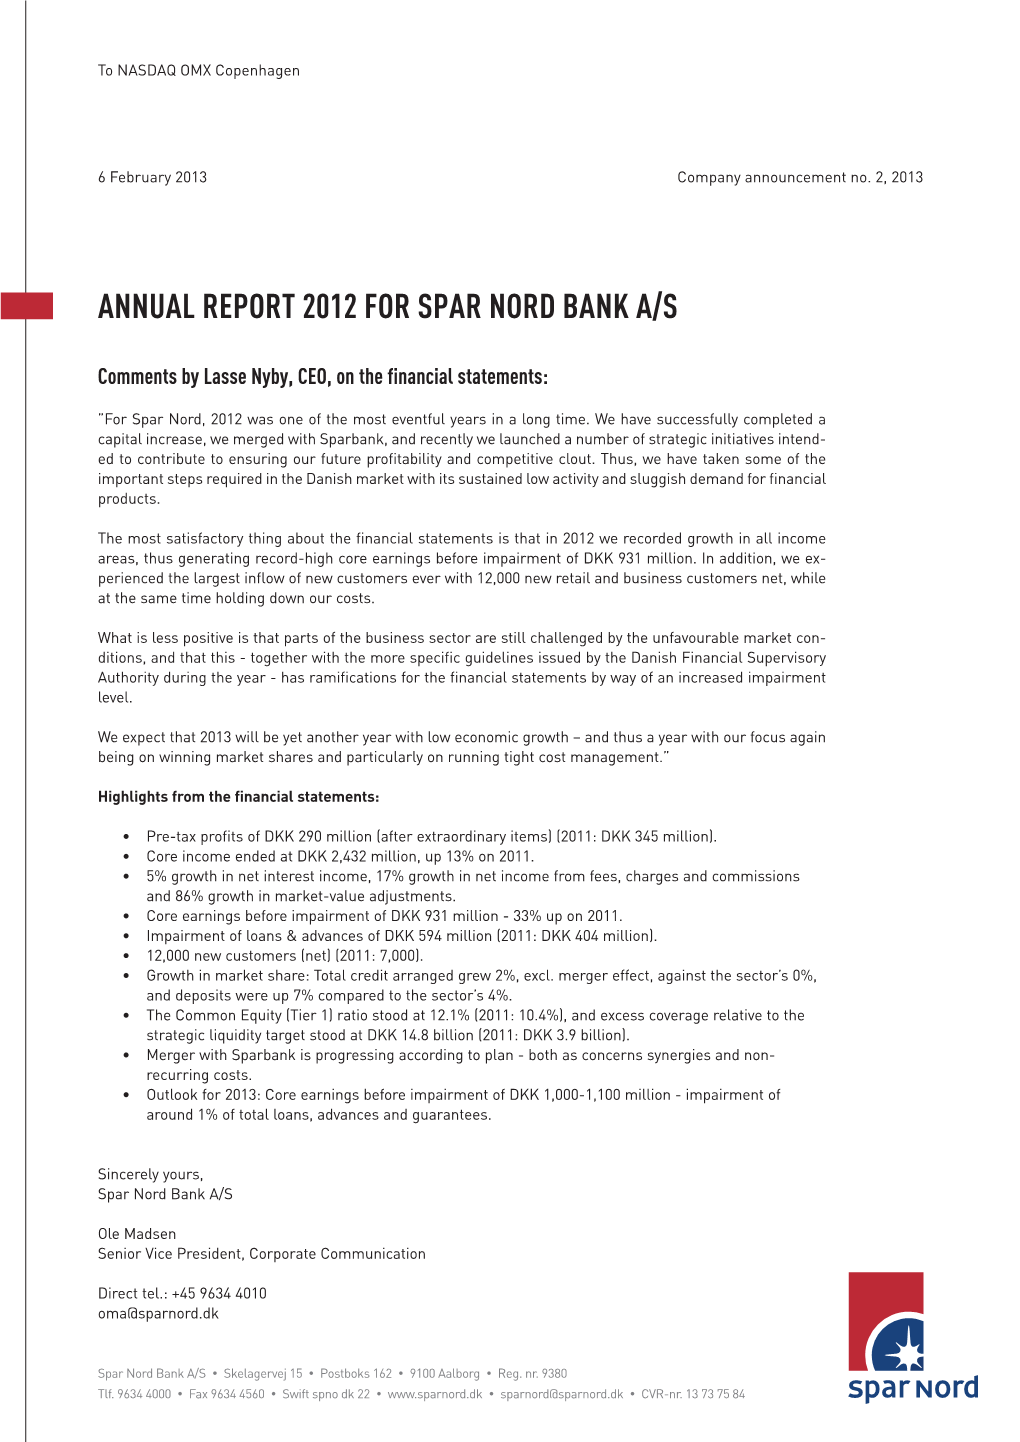 Annual Report 2012 for Spar Nord Bank A/S